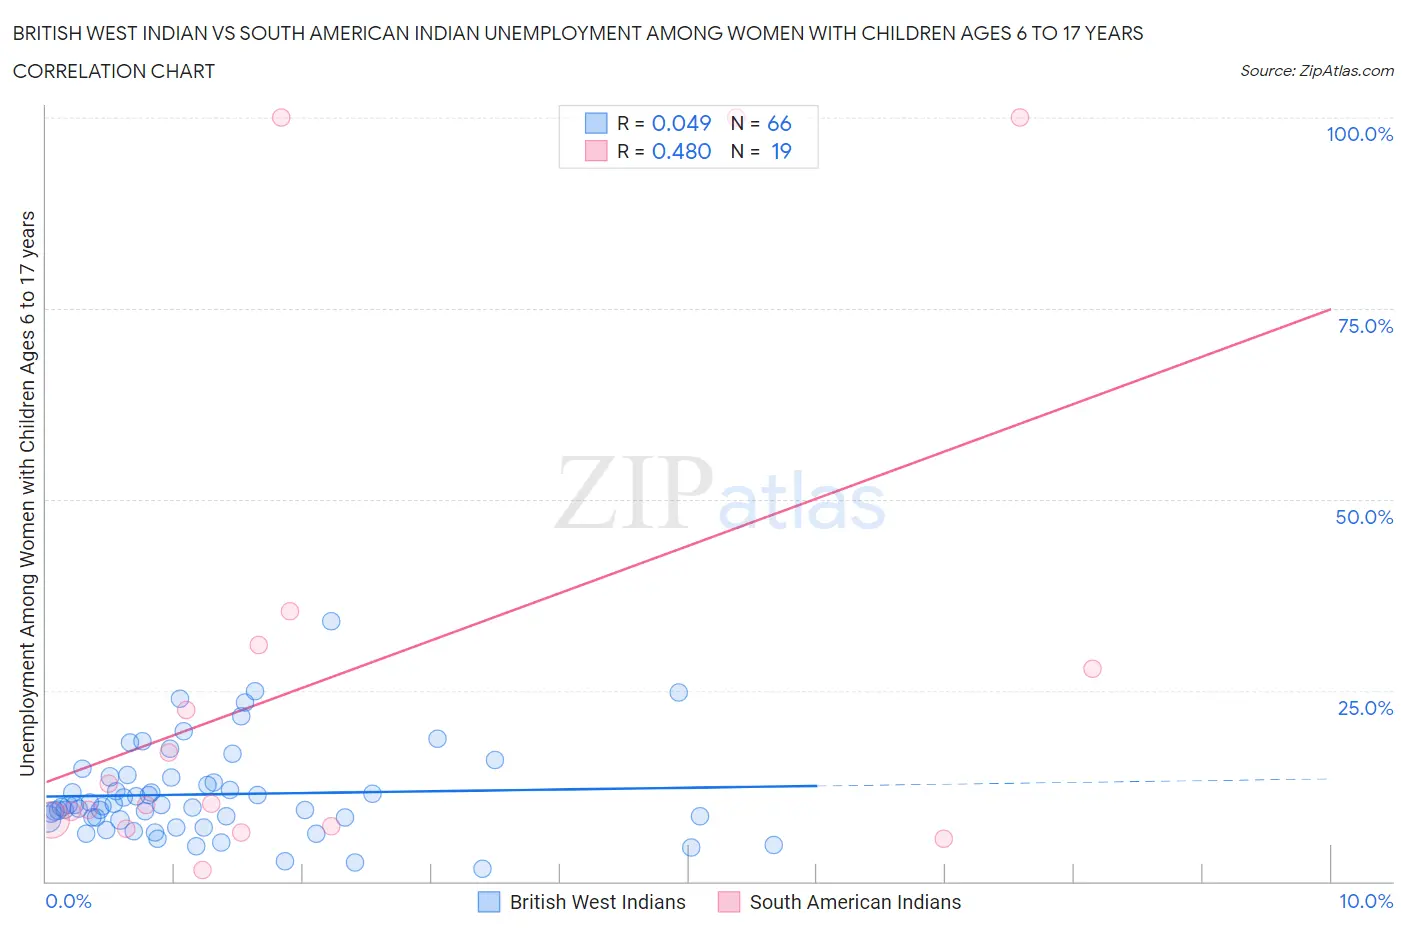 British West Indian vs South American Indian Unemployment Among Women with Children Ages 6 to 17 years